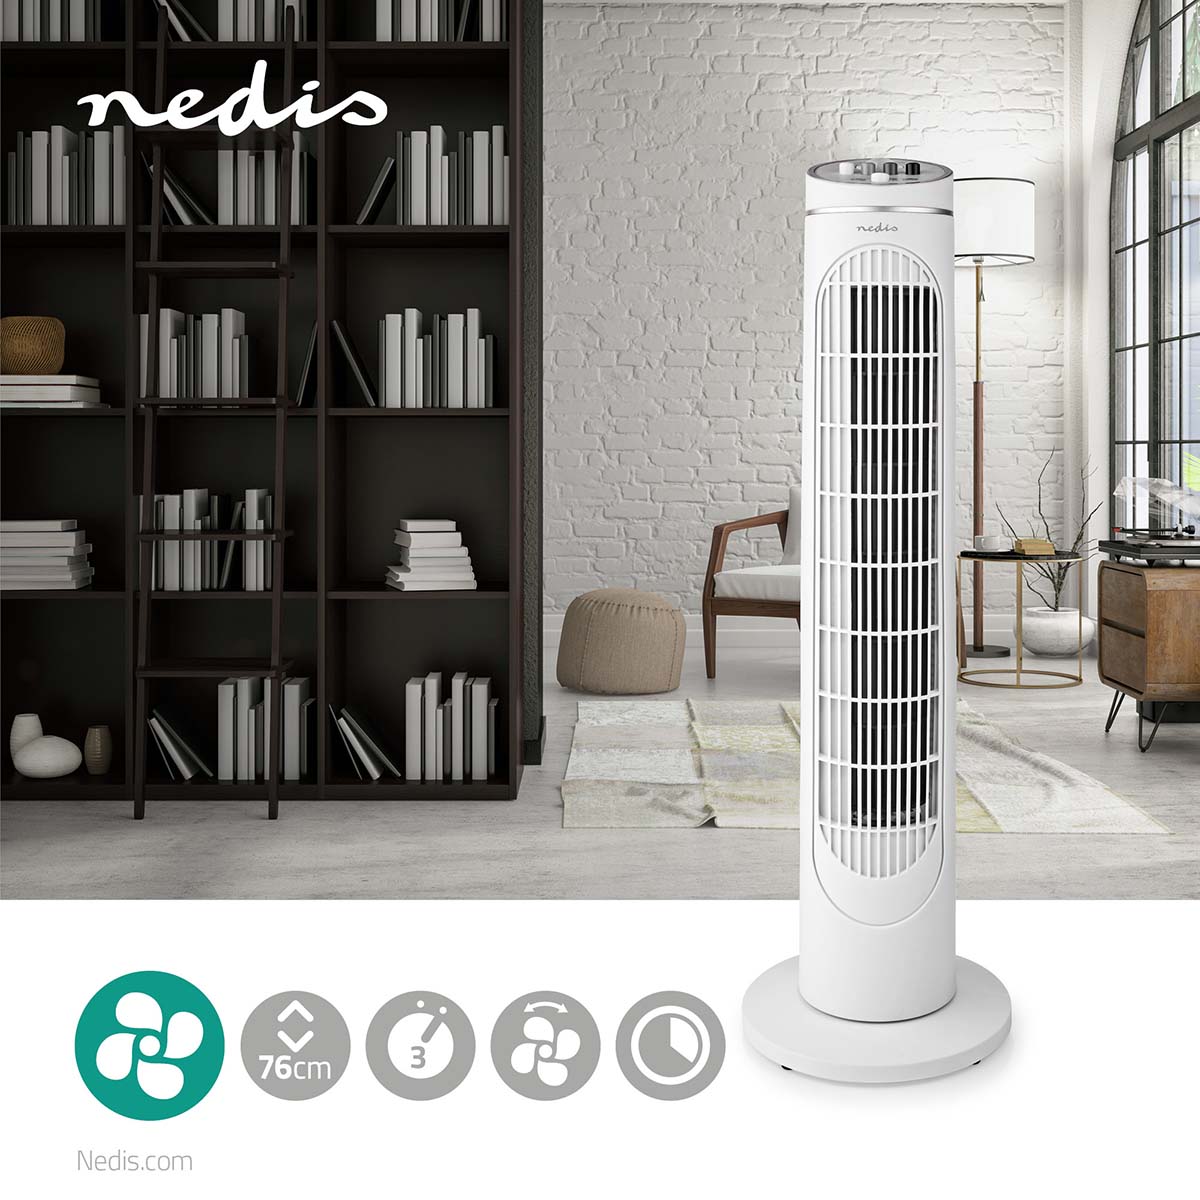 Nedis Tower Fan with timer white 30"